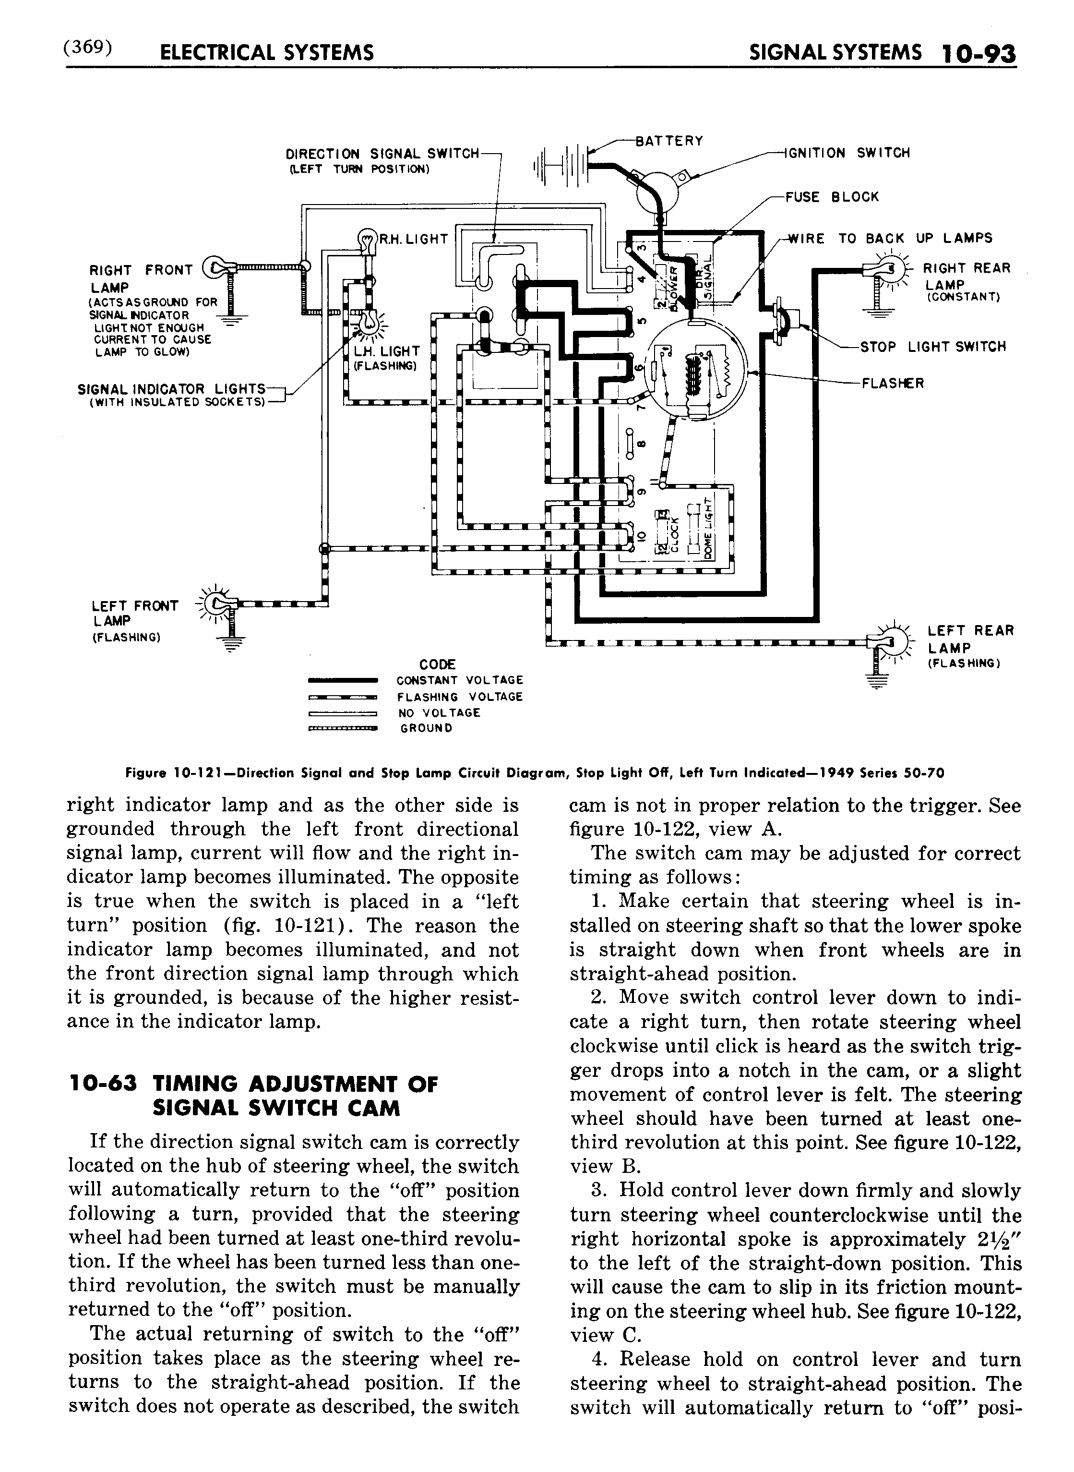 n_11 1948 Buick Shop Manual - Electrical Systems-093-093.jpg